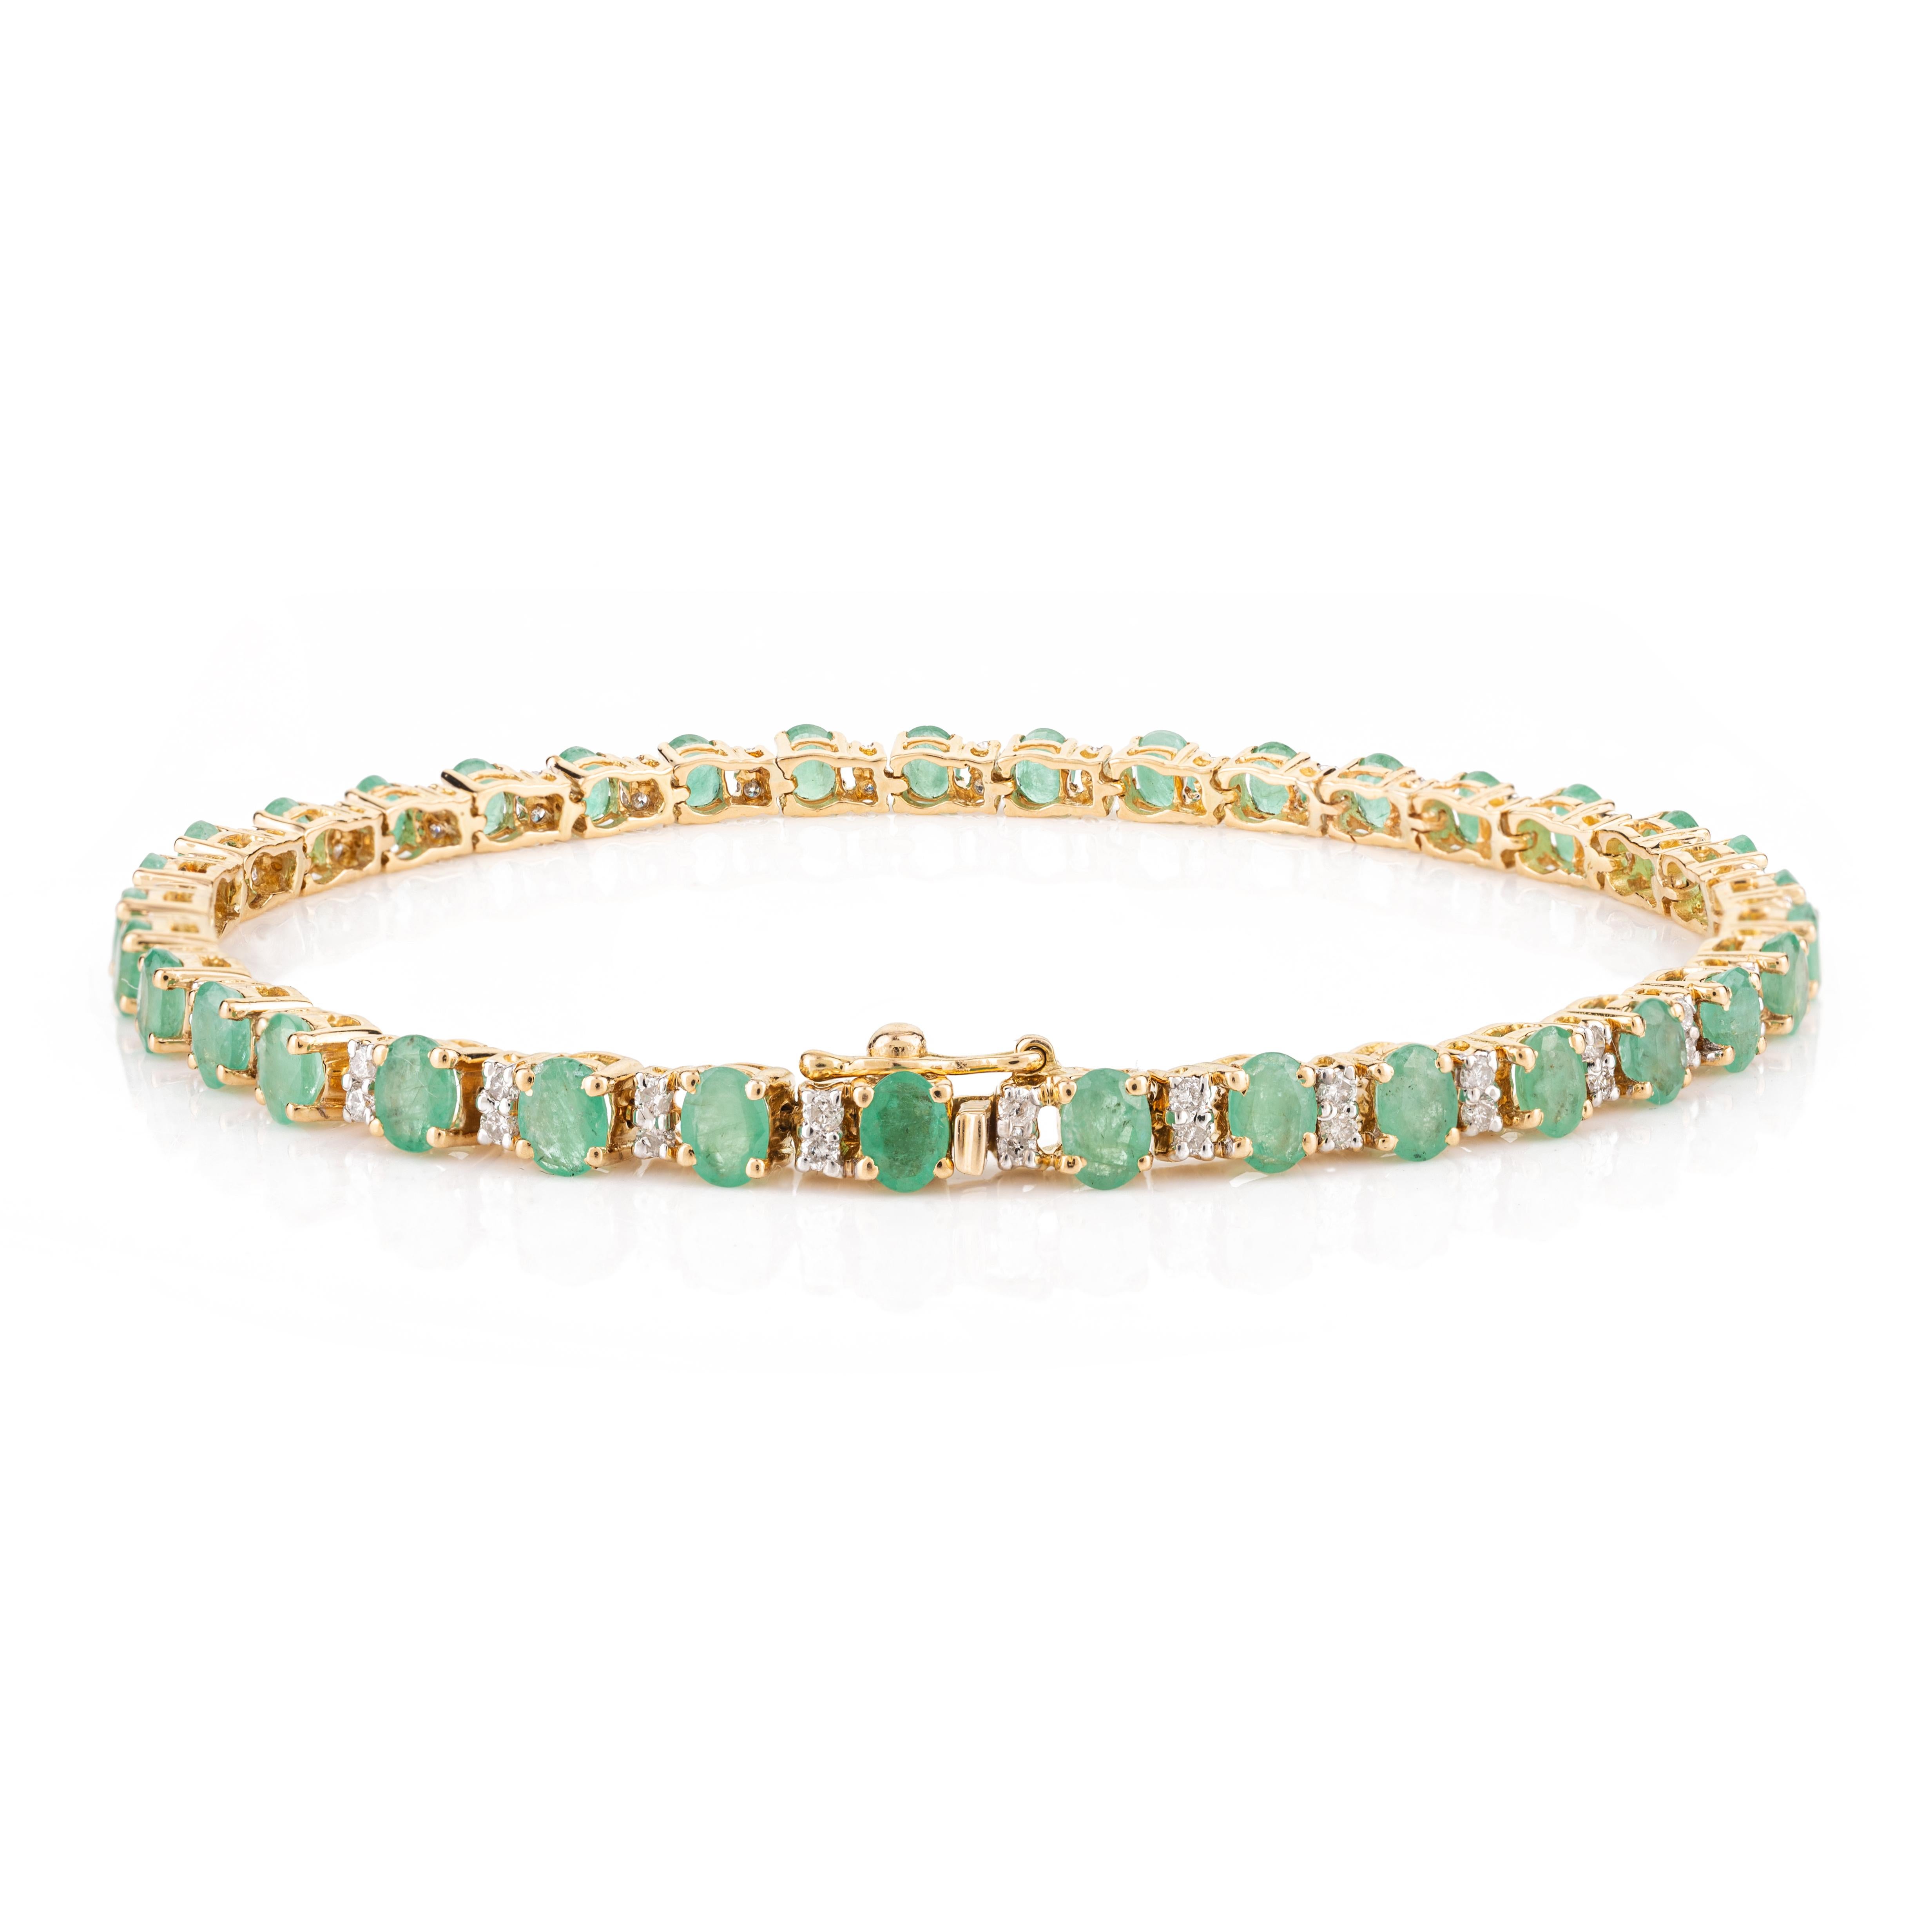 Contemporary 5.68 Carat Oval Cut Emerald and Diamond Tennis Bracelet in 18k Yellow Gold For Sale